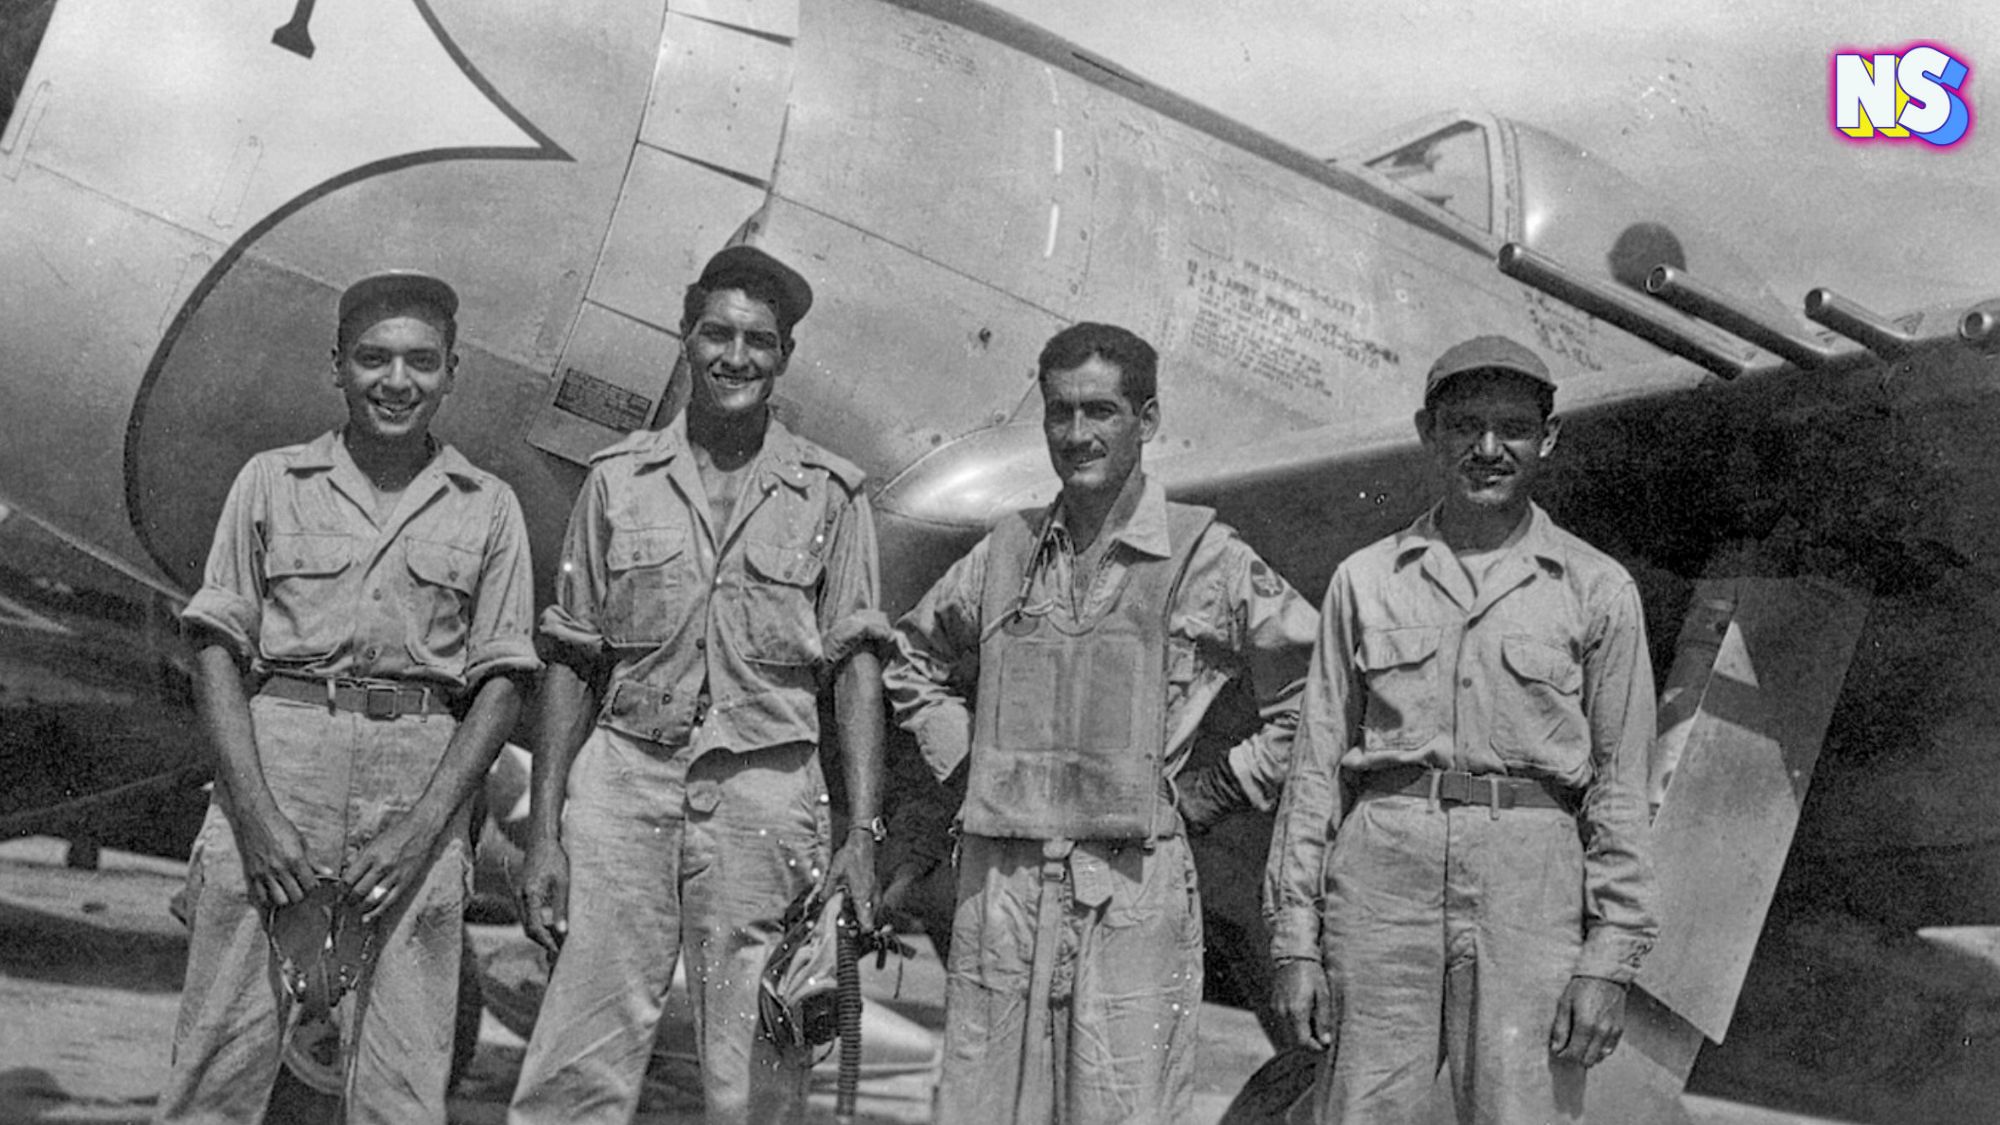 Featured image: Mexican air force Capt. Radames Gaxiola Andrade stands in front of his P-47D with his maintenance team after he returned from a combat mission. Captain Andrade was assigned to the Mexican air force's Escuadron 201. Members of the Escuadron 201 fought alongside U.S. forces during World War II.